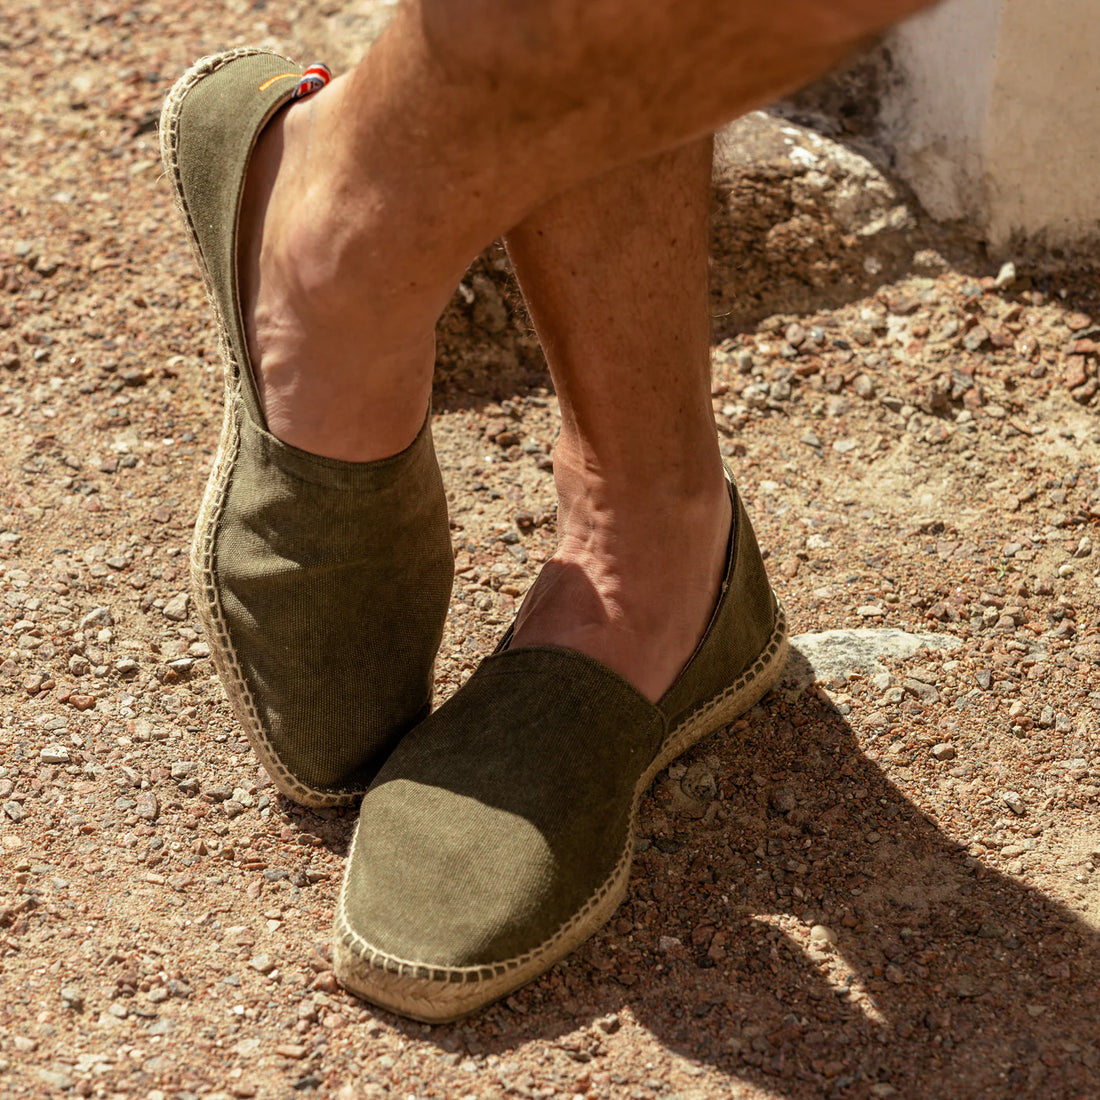 A person wearing green espadrilles standing on a gravel surface.